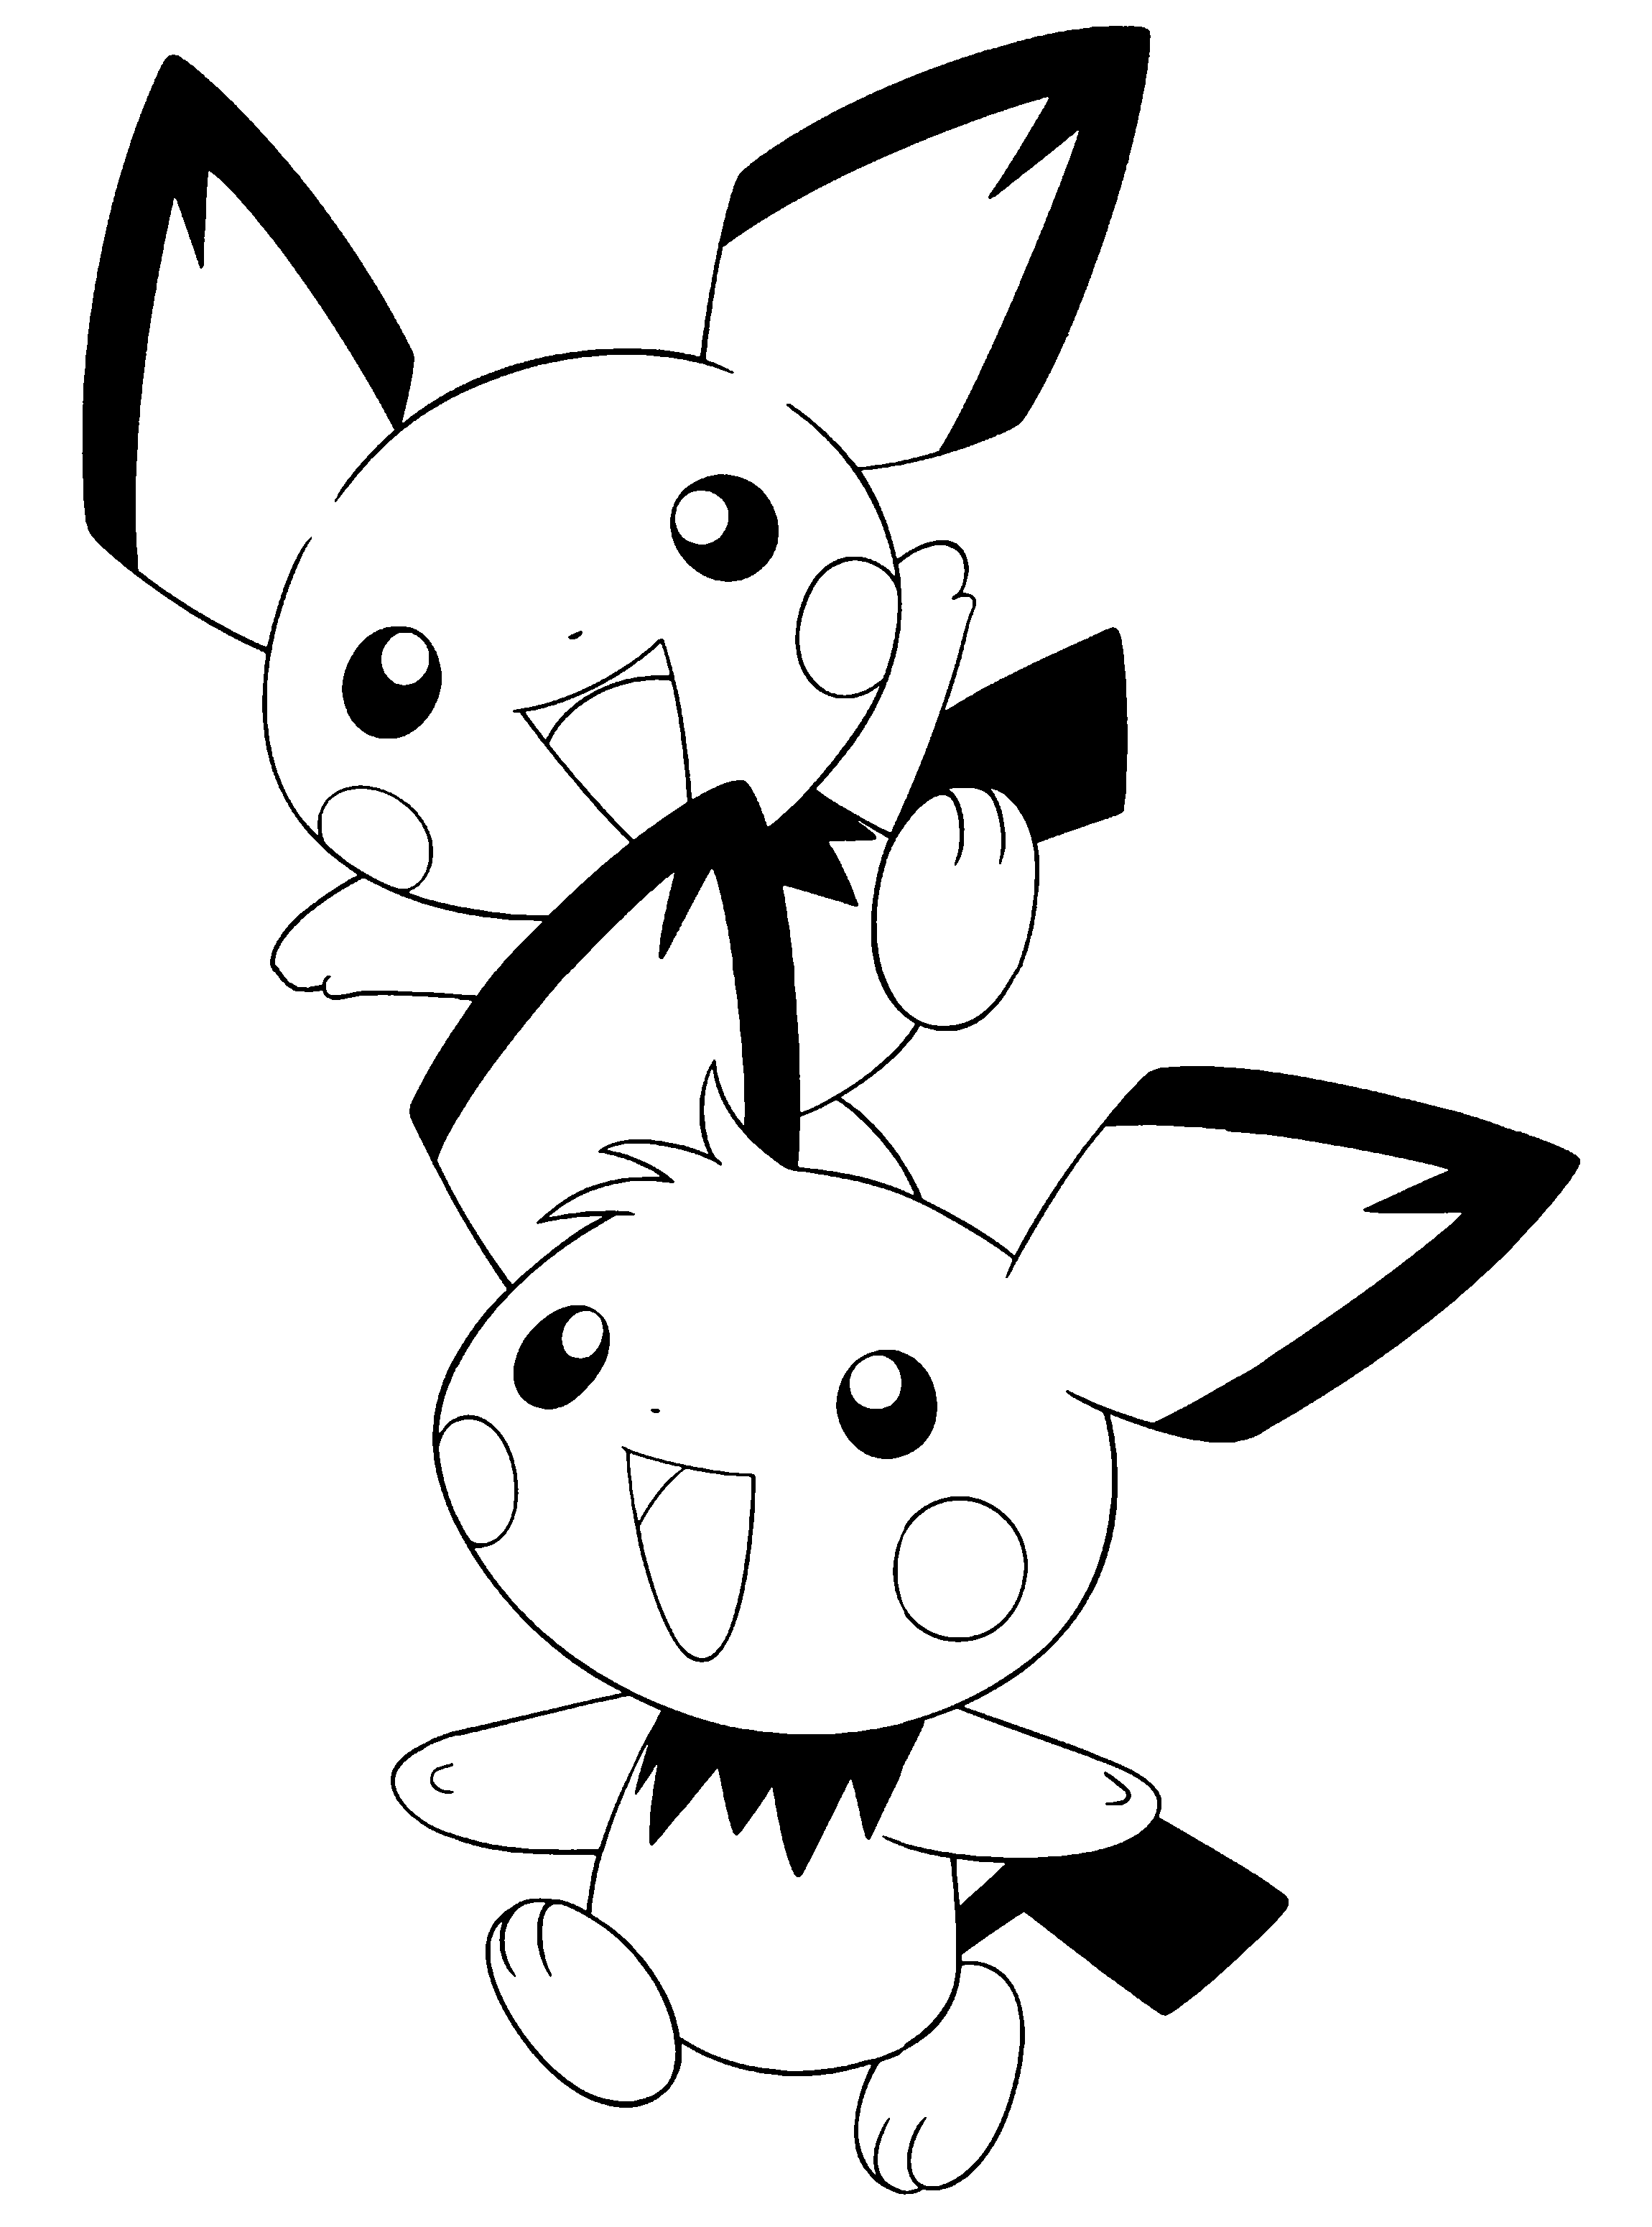 animated-coloring-pages-pokemon-image-0319